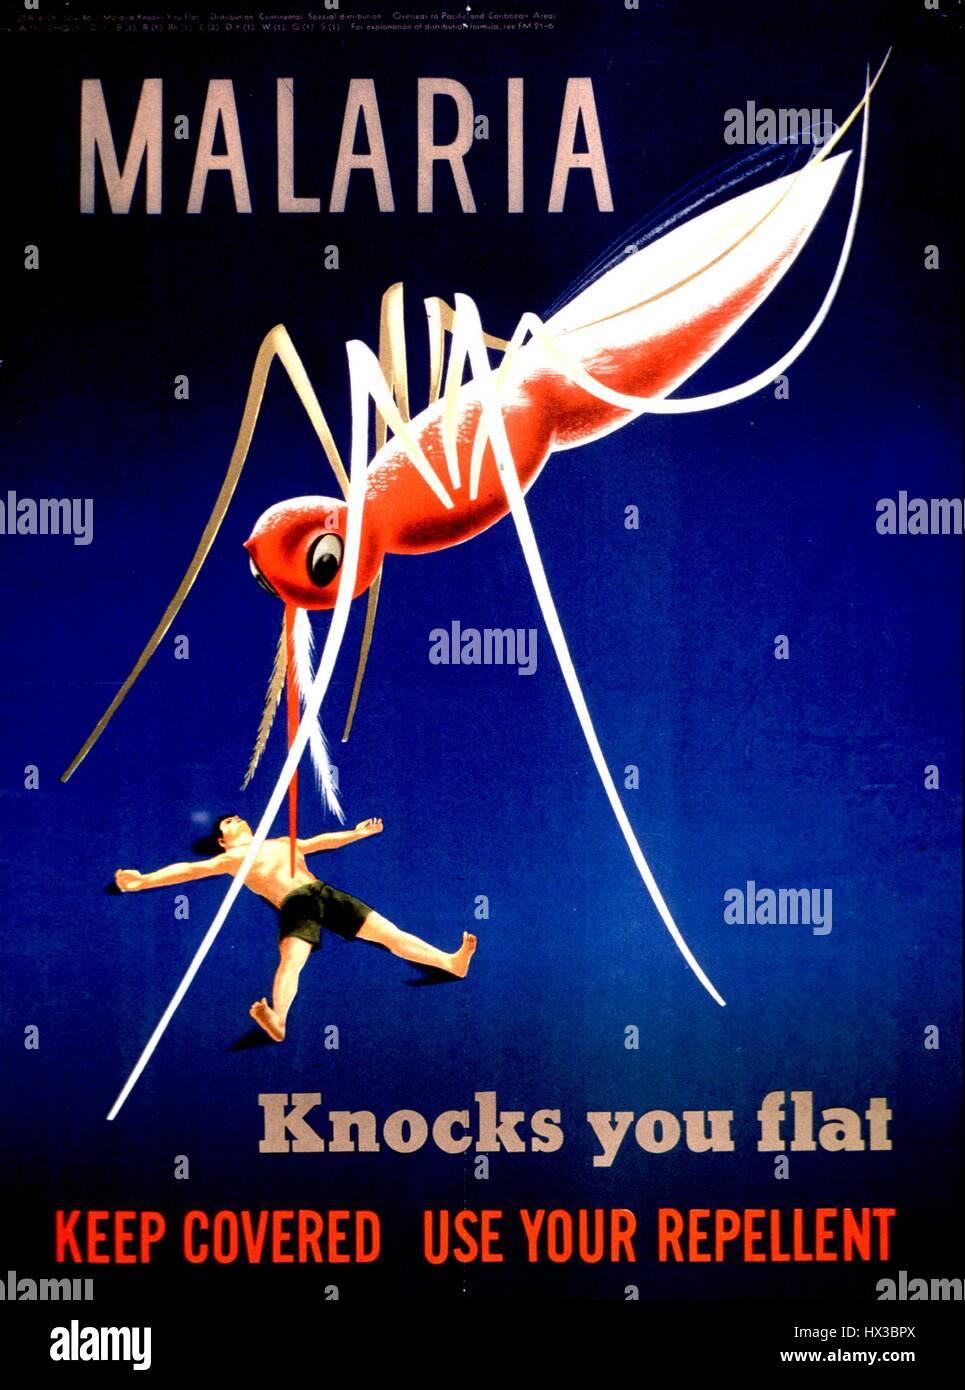 Poster depicting a giant mosquito standing over a man's body, advocating for people to protect themselves from malaria, 1920. Courtesy National Library of Medicine. Stock Photo